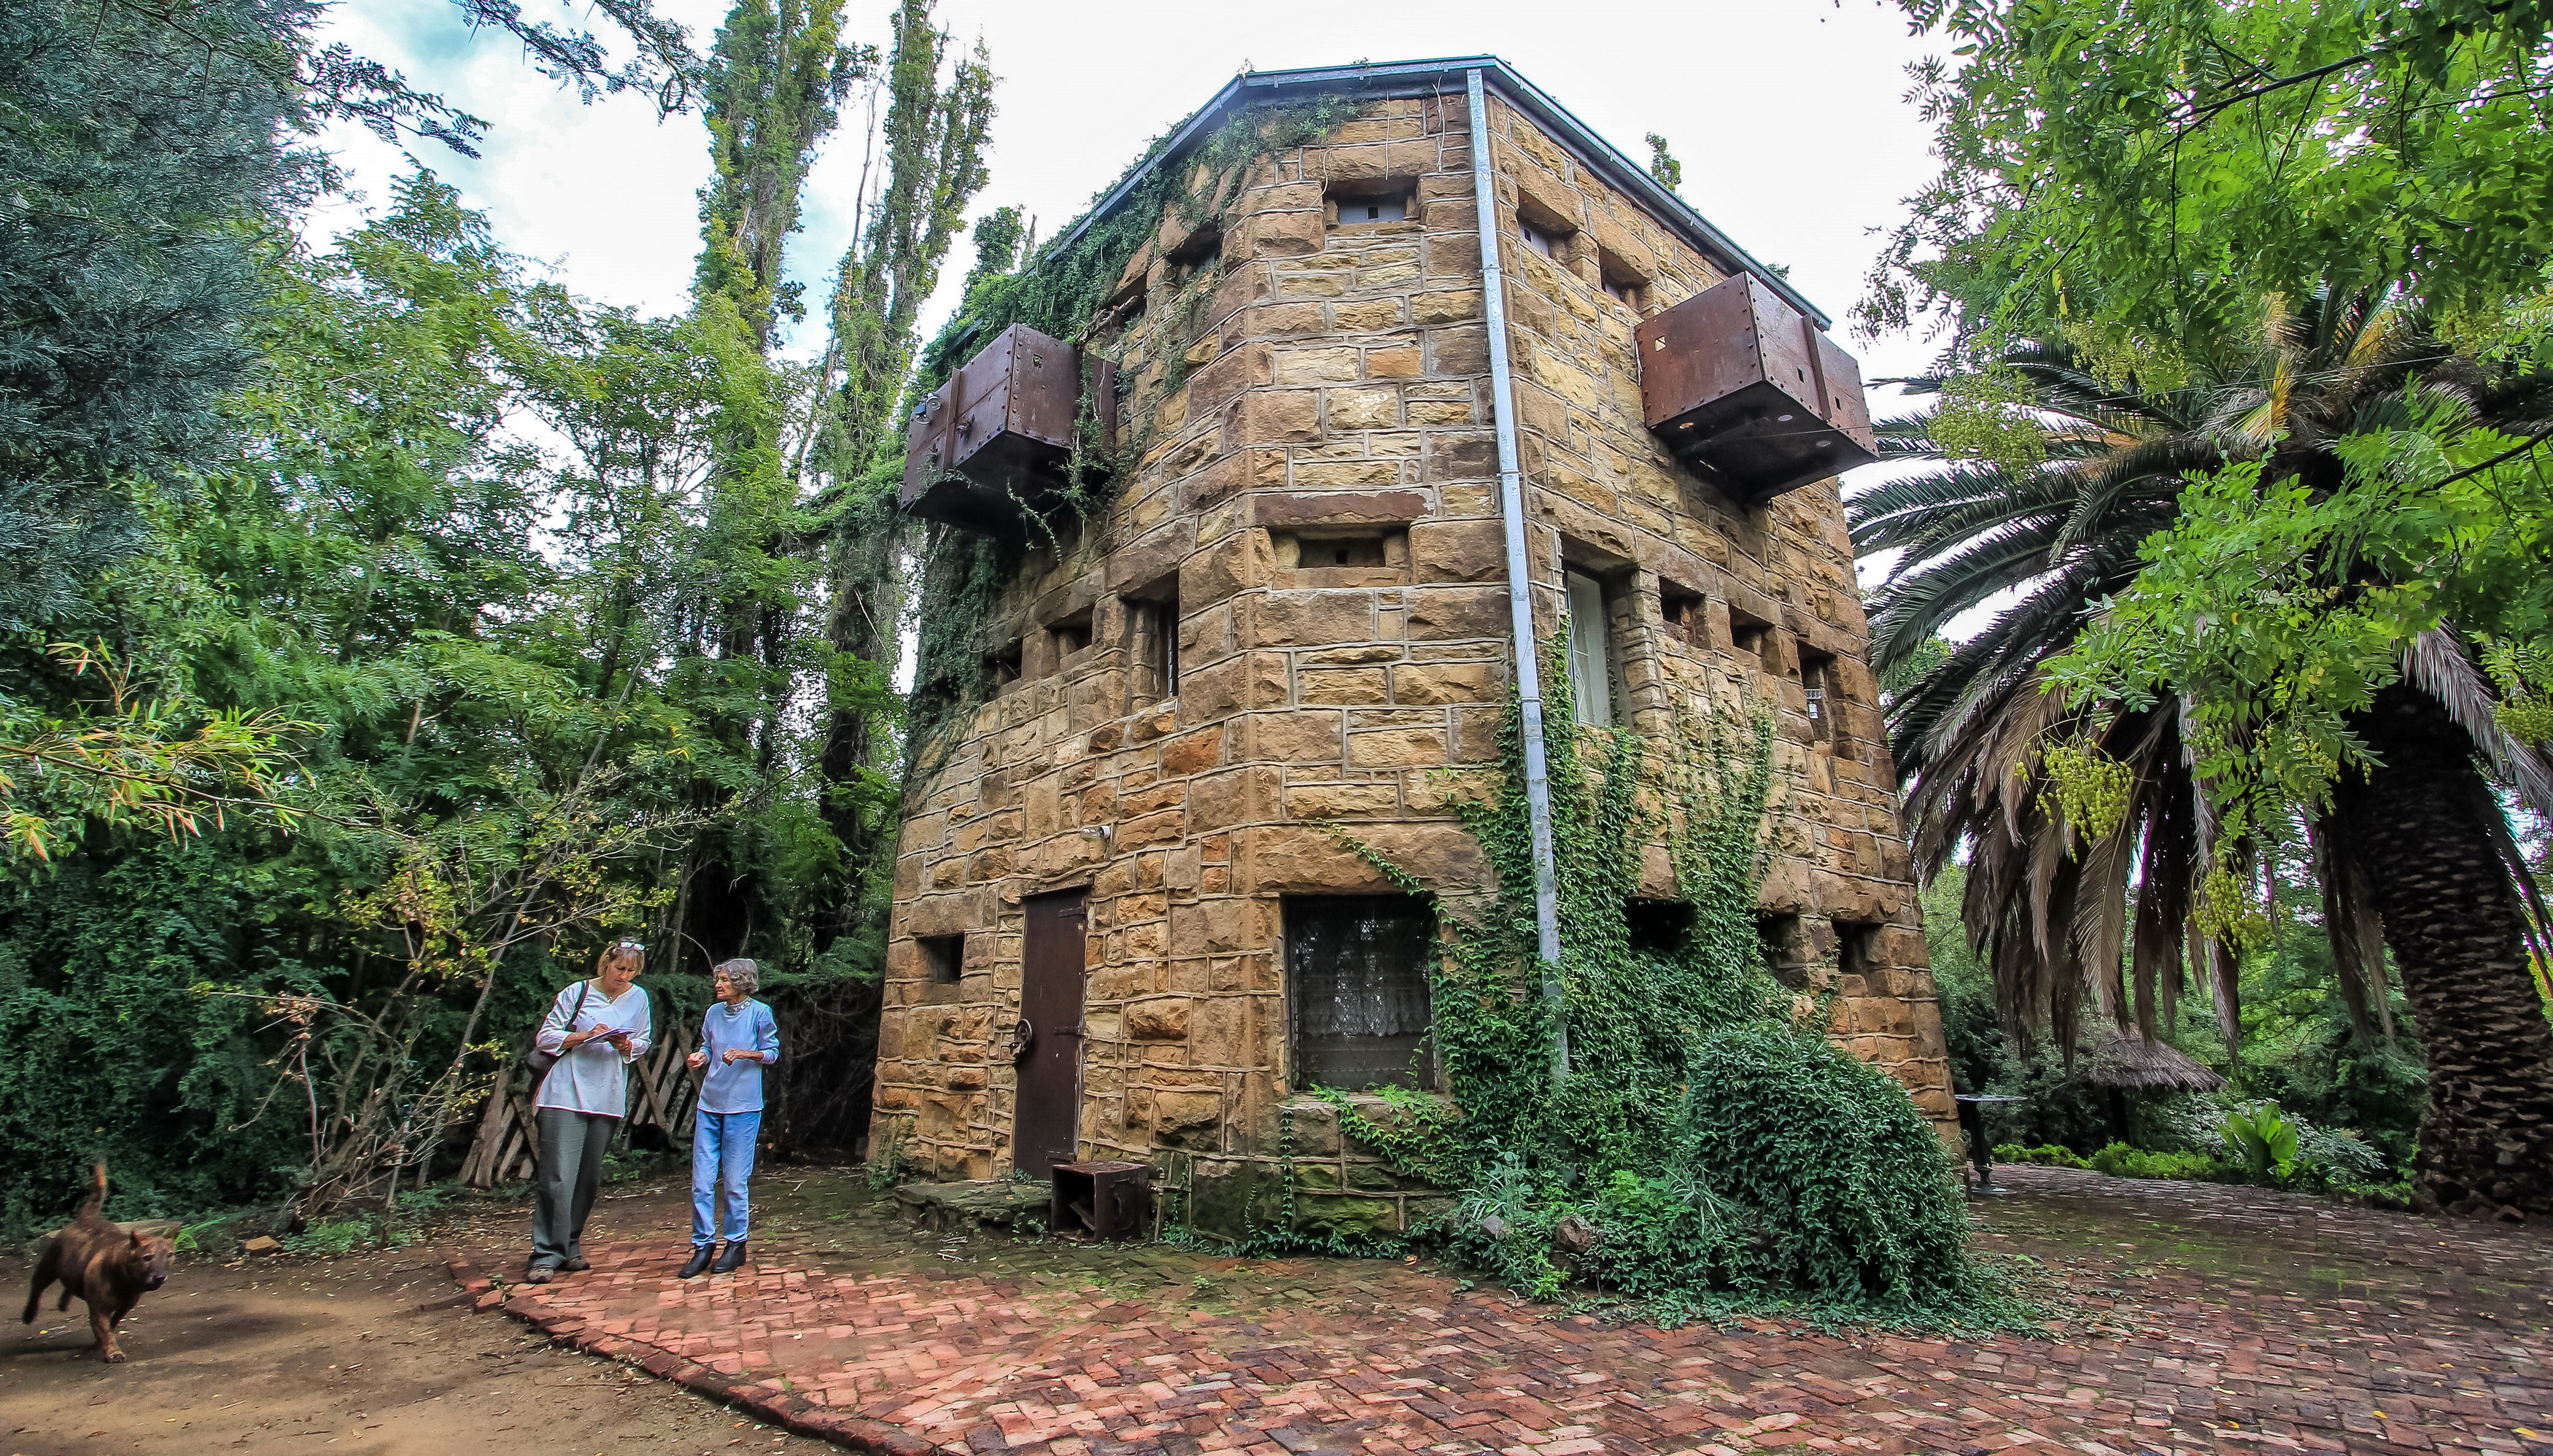 The blockhouse at Norval’s Pont — home to Paul and Suzette Jones for 45 years. Image: Chris Marais